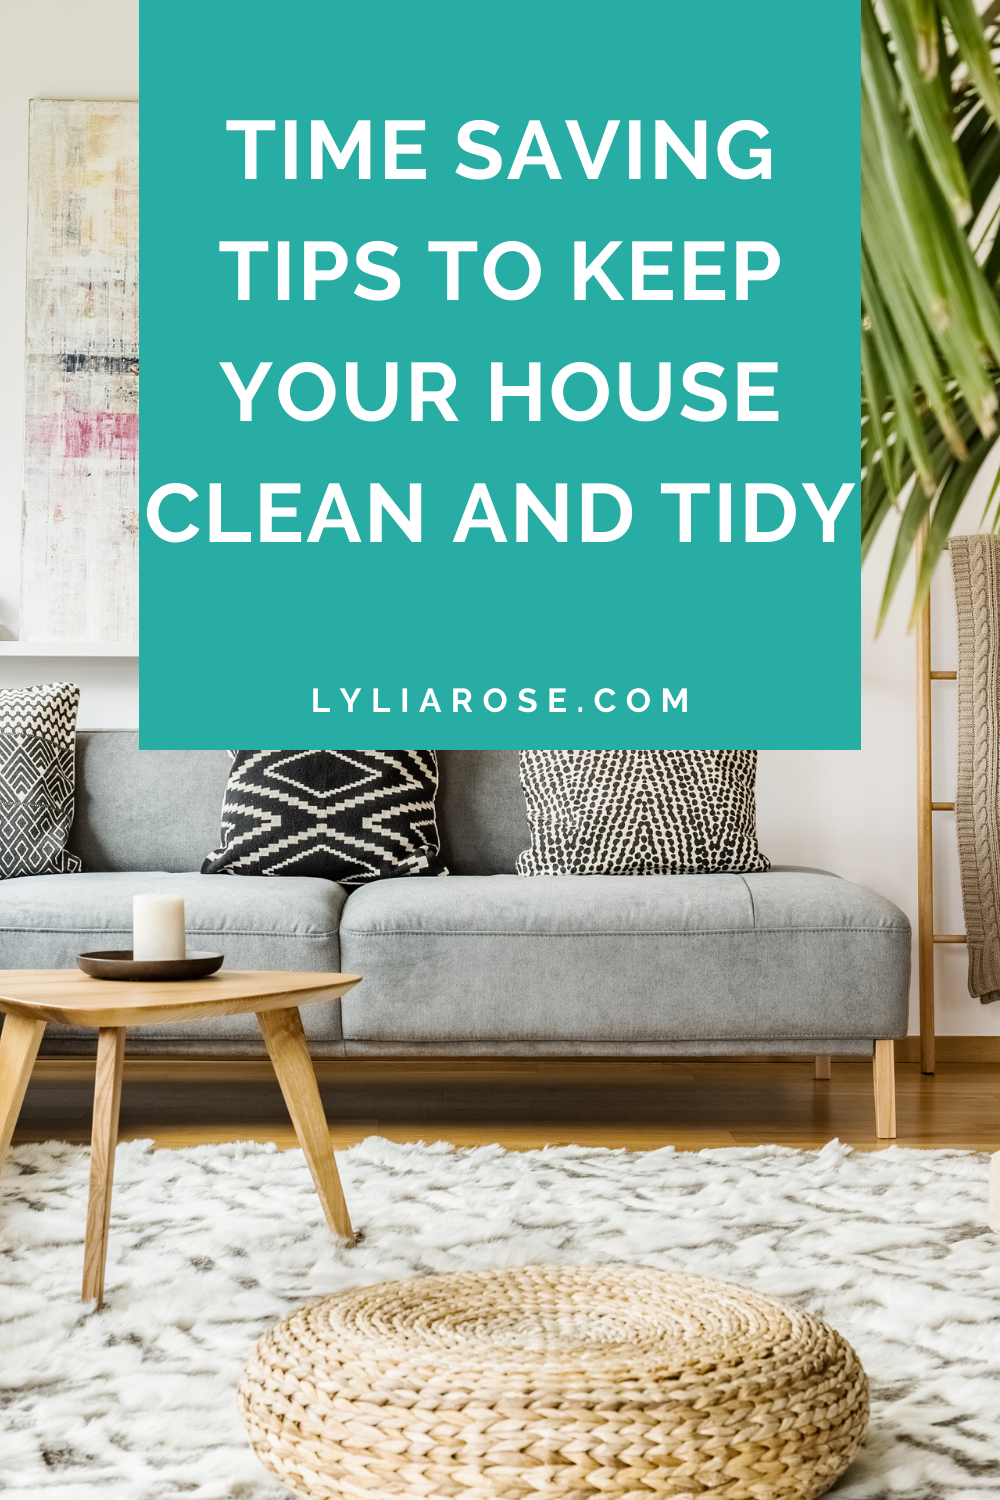 Time saving tips to keep your house clean and tidy